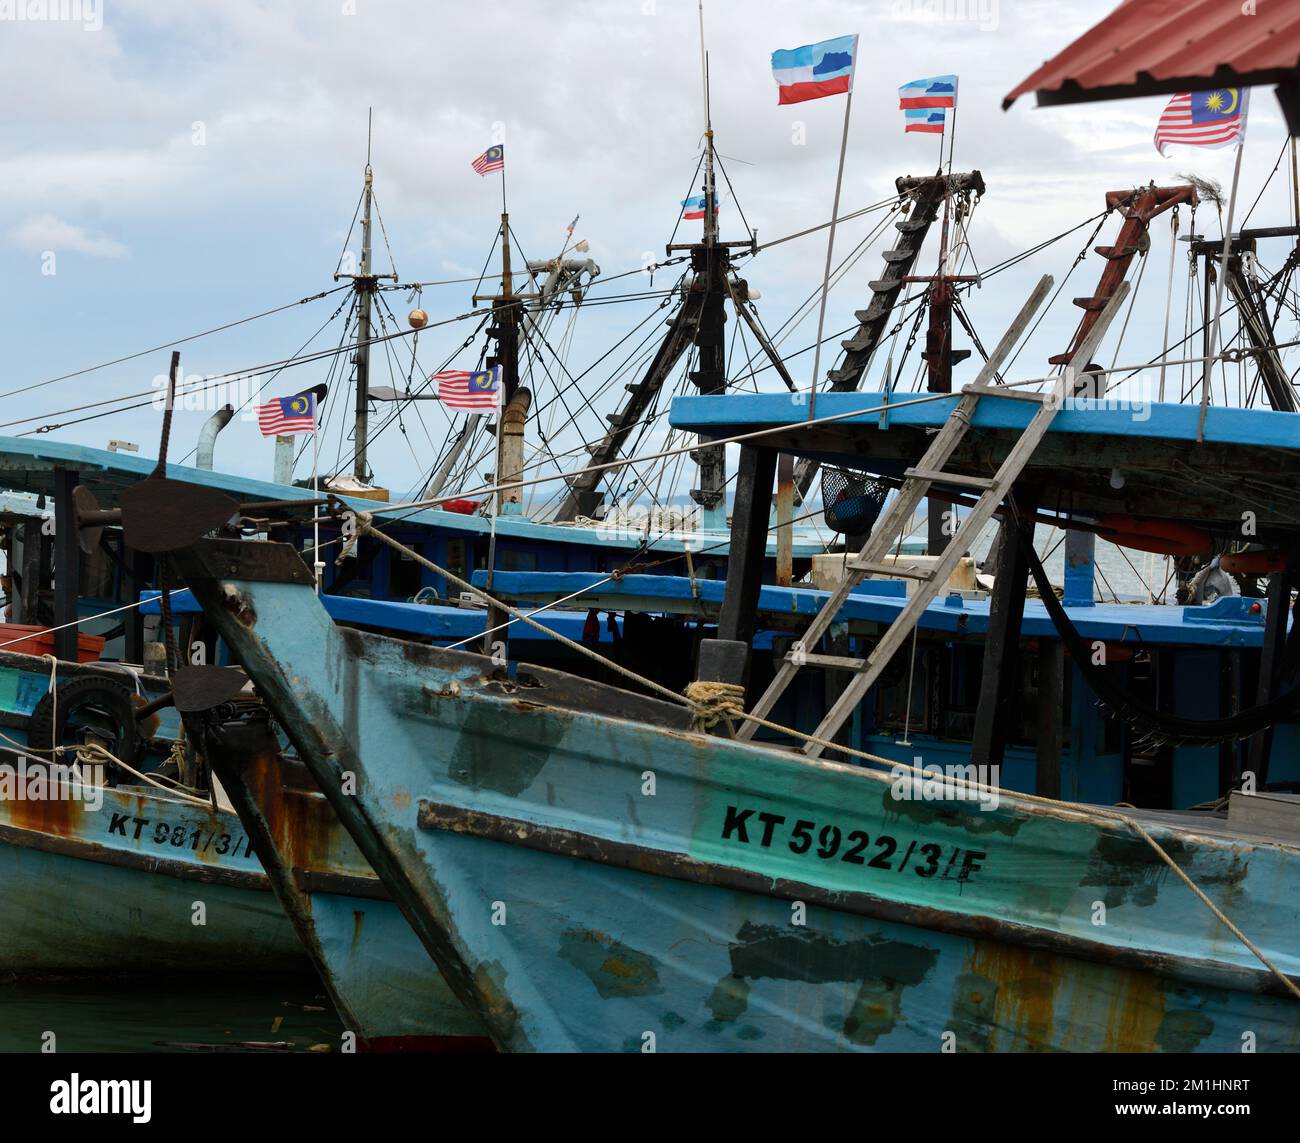 Fishing boats operated by the indigenous Rungus people in Kudat harbour on the Sulu Sea. Sabah, Borneo, Malaysia. Stock Photo